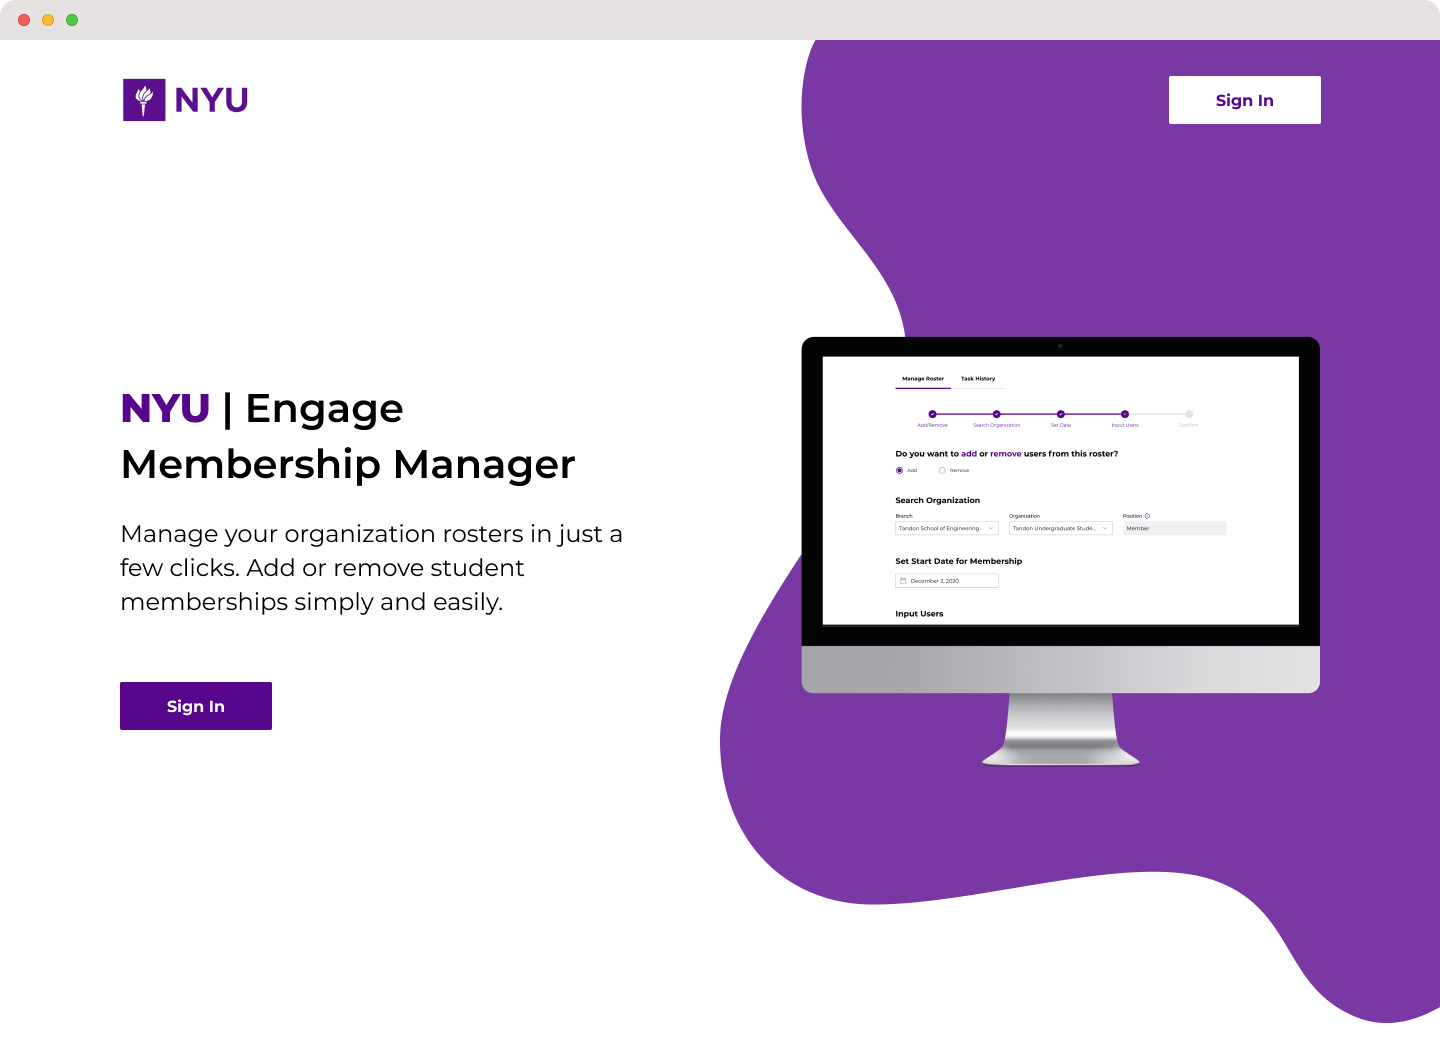 Website mockup, the header has the NYU logo an a button to sign in, the left-hand side has a title that reads 'NYU Engage Membership Manager' with a description 'Manage your organization rosters in just a few clicks. Add or remove student memberships simply and easily'. The right-hand side has a screenshot of the membership form